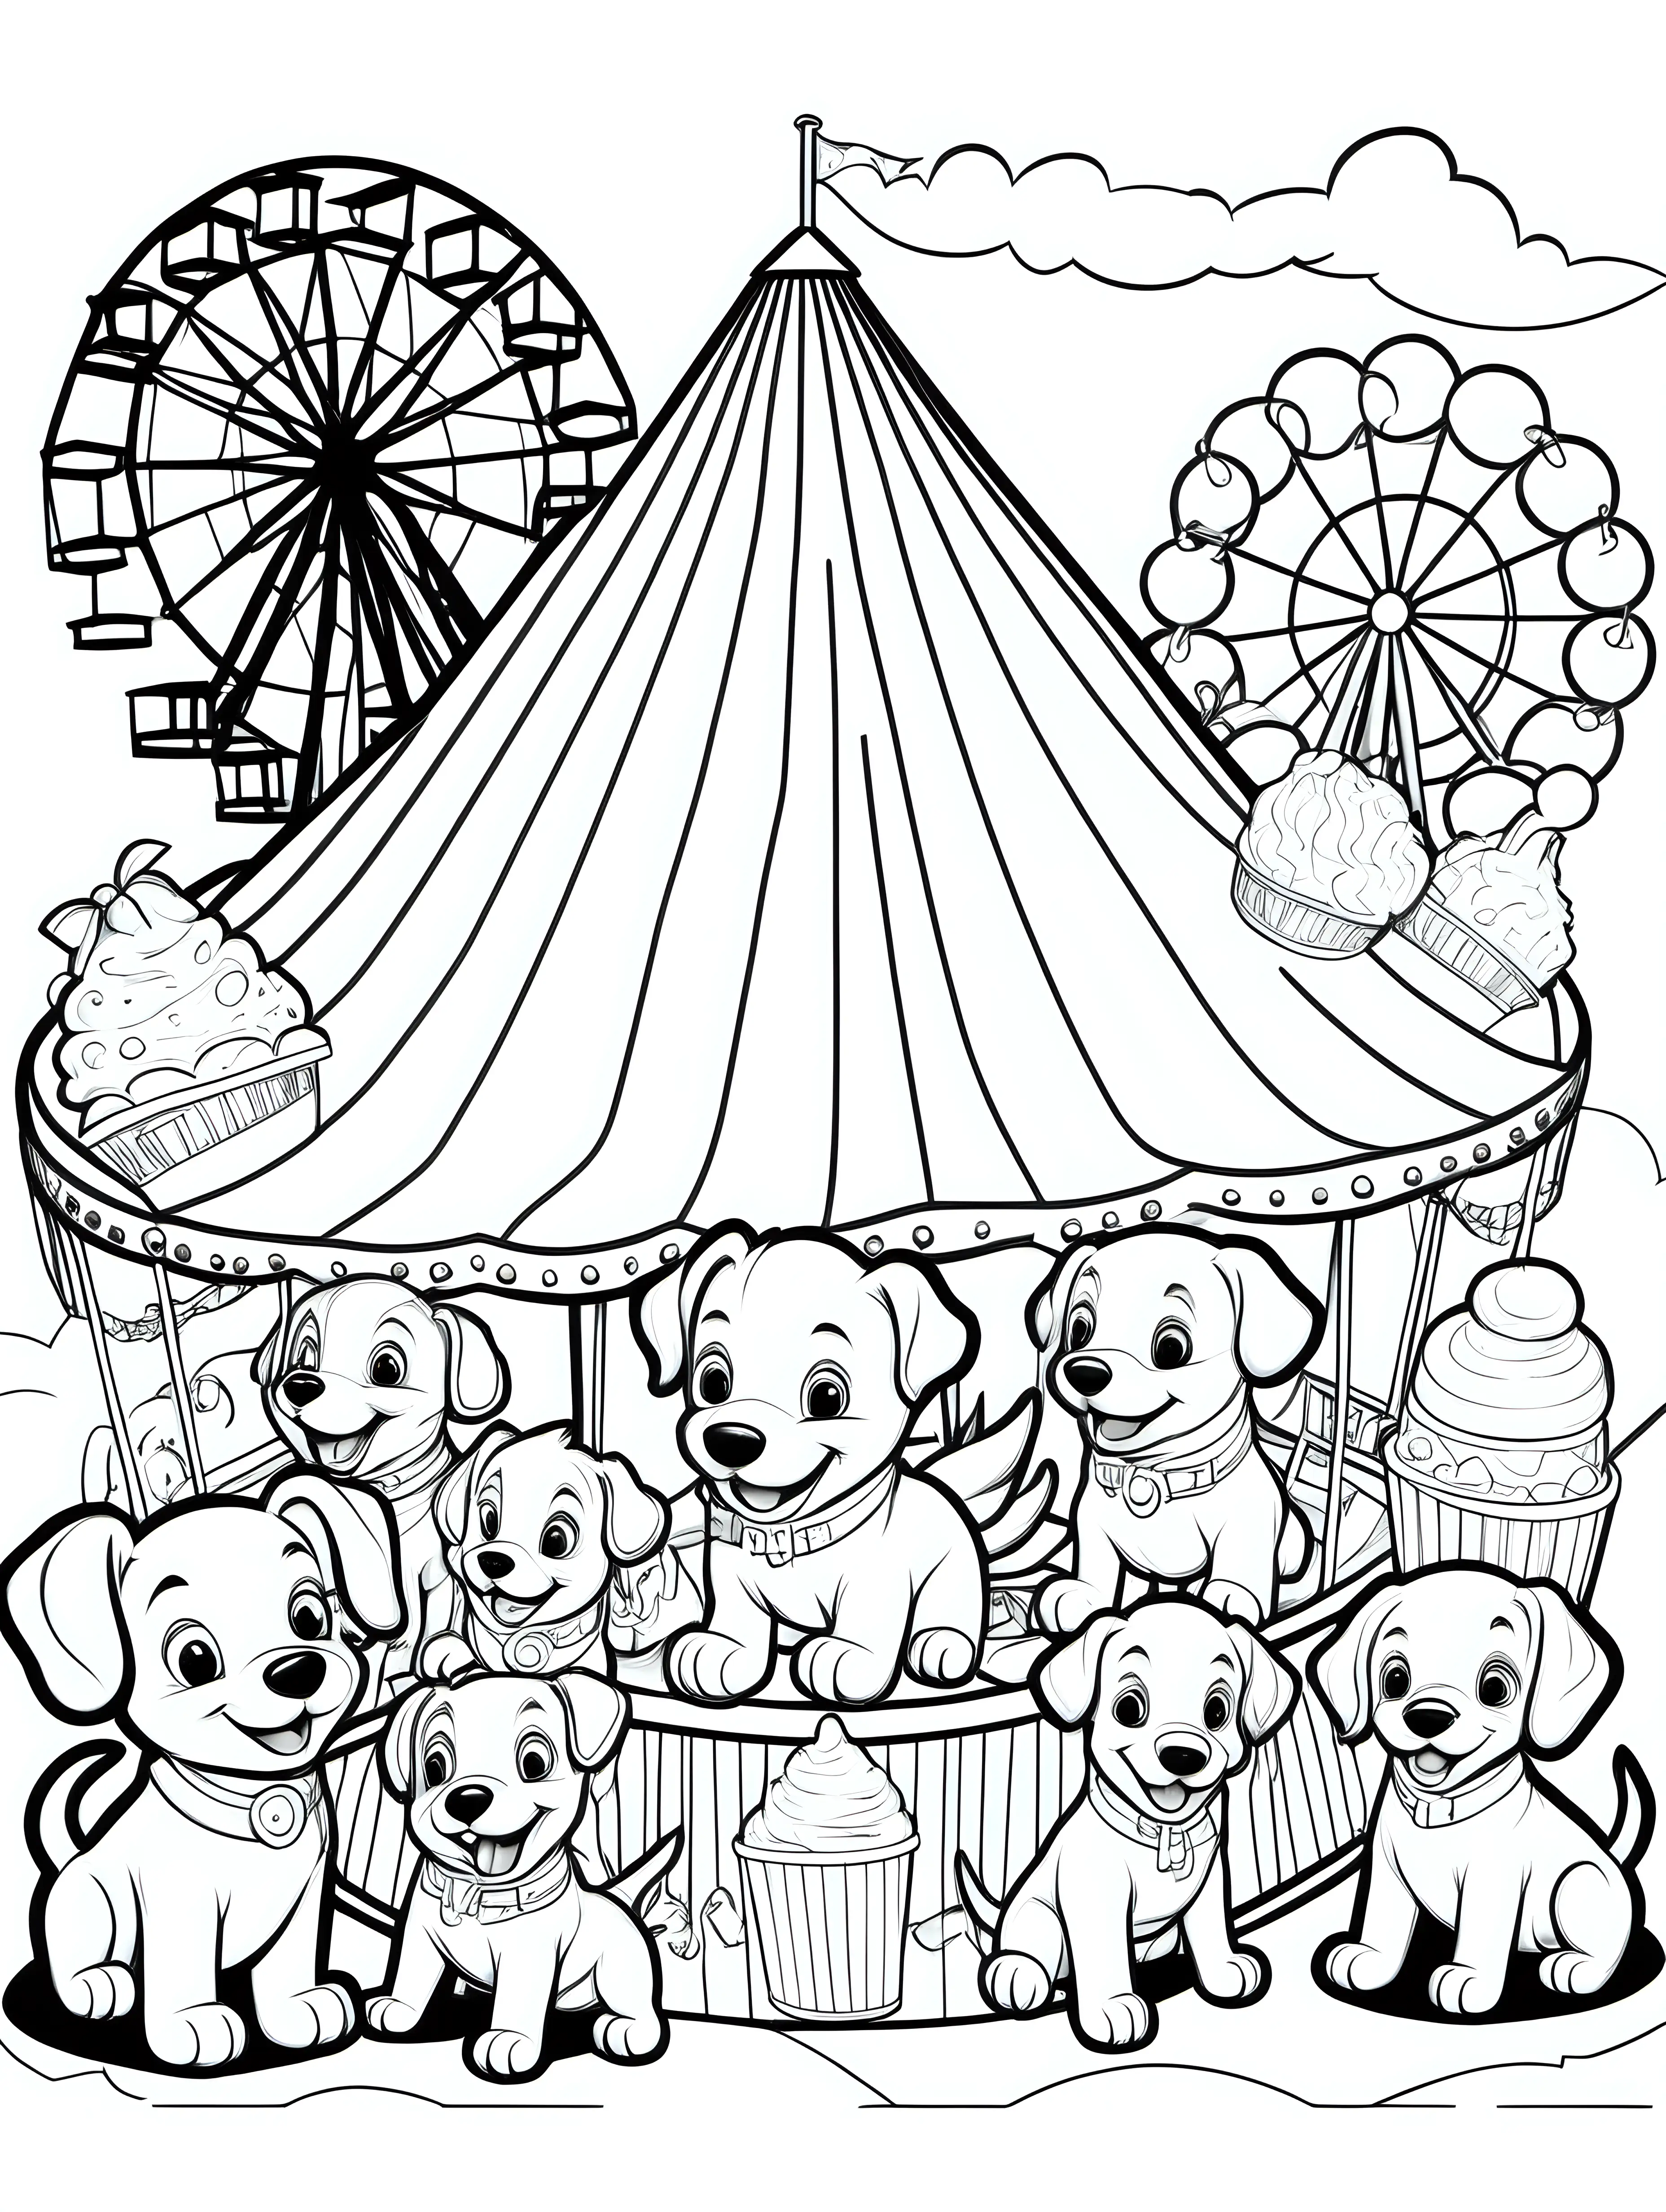 Coloring book page for young child, Puppies at the Carnival: Puppies enjoying carnival rides, cotton candy, and games at a lively carnival,  no bleed, Coloring Page, black and white, line art, white background, Simplicity, Ample White Space. The background of the coloring page is plain white to make it easy for young children to color within the lines. The outlines of all the subjects are easy to distinguish, making it simple for kids to color without too much difficulty, no color on page